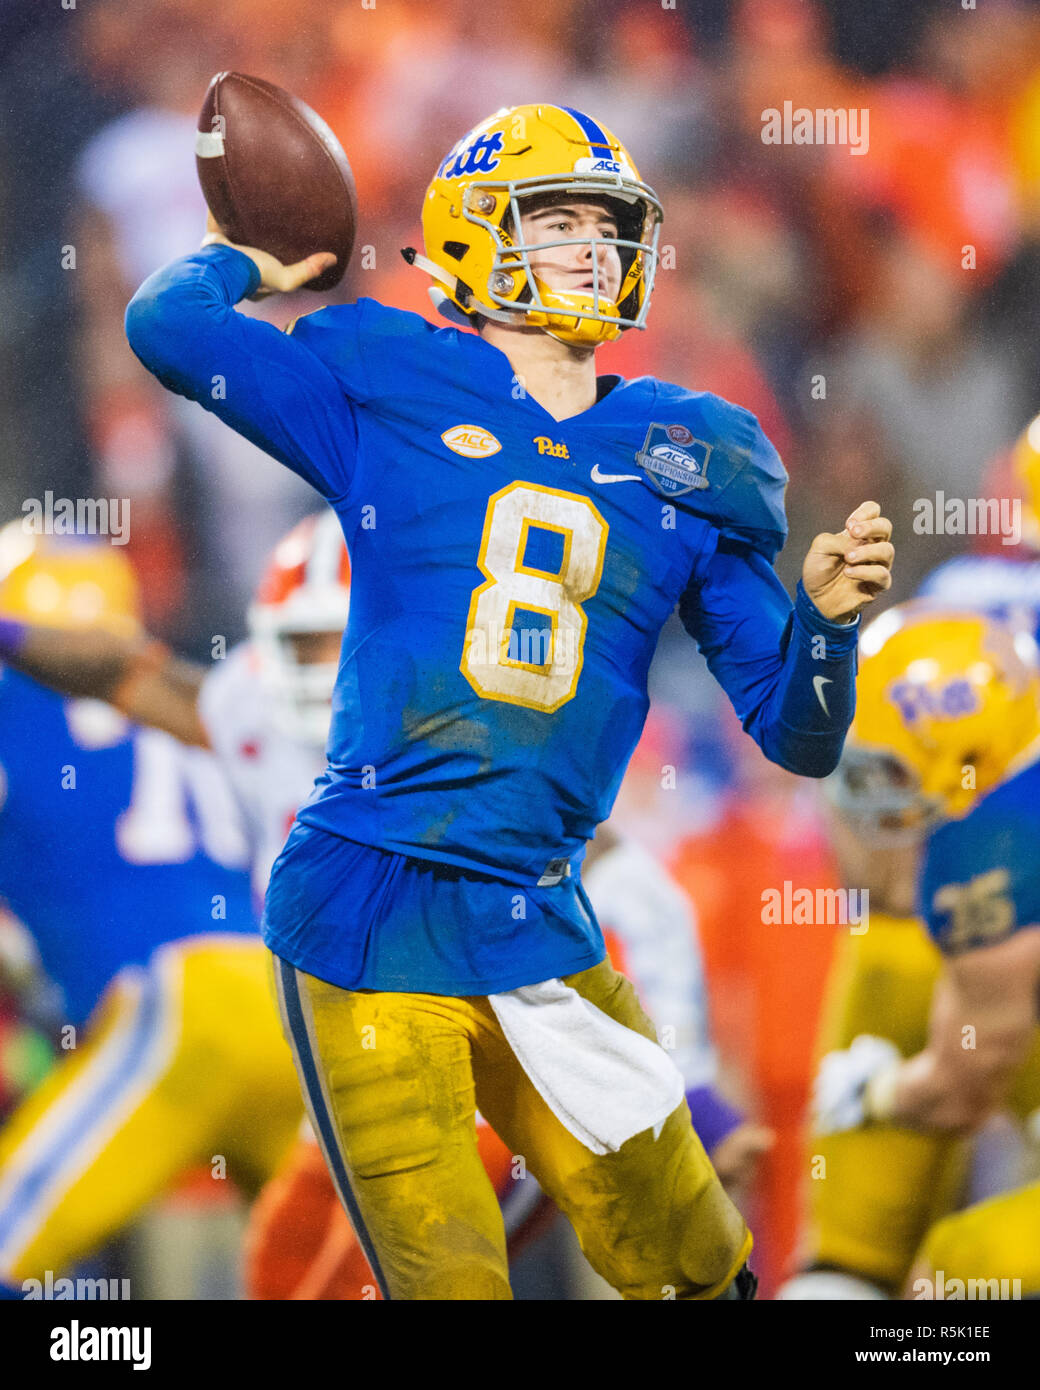 Pittsburgh Panthers quarterback Kenny Pickett (8) during the ACC College Football Championship game between Pitt and Clemson on Saturday December 1, 2018 at Bank of America Stadium in Charlotte, NC. Jacob Kupferman/CSM Stock Photo